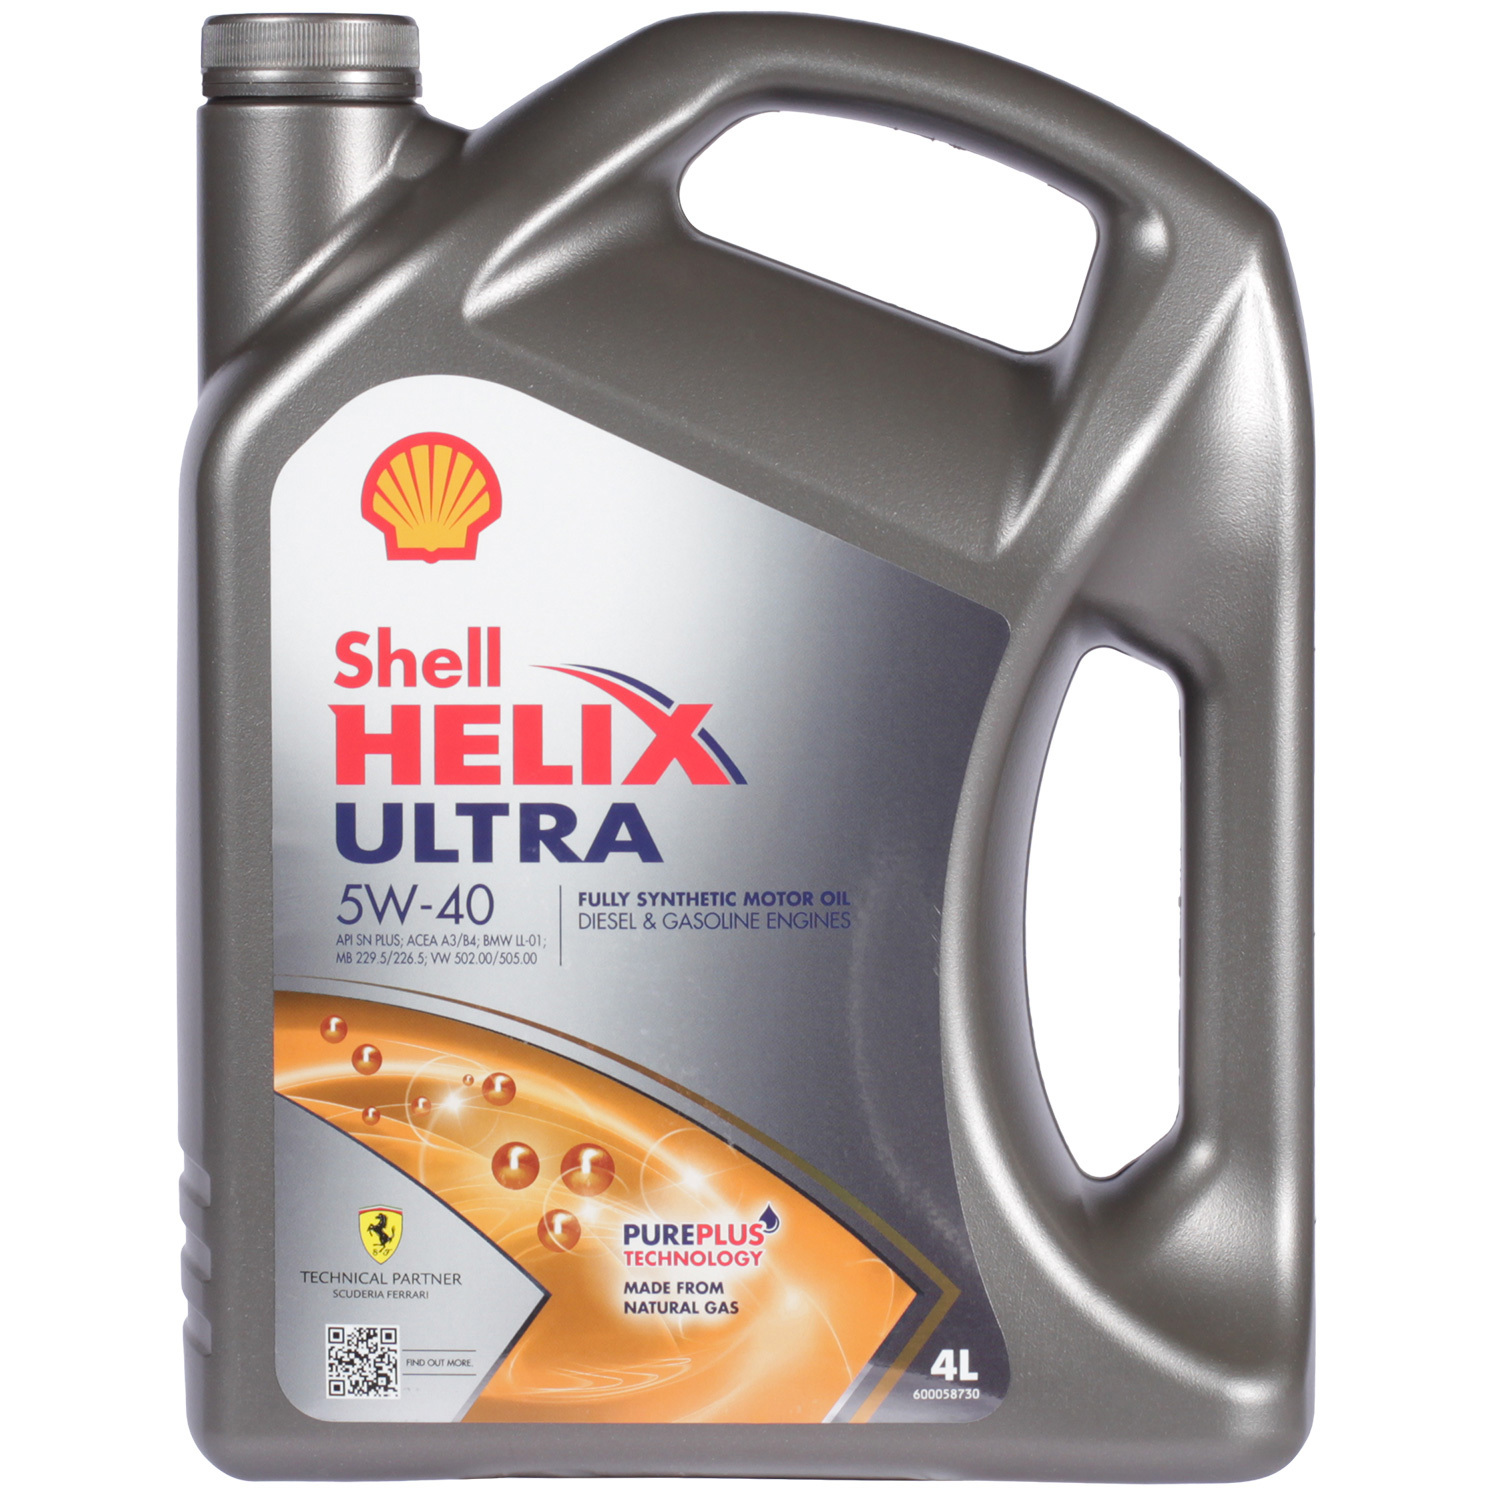 Shell Моторное масло Shell Helix Ultra 5W-40, 4 л